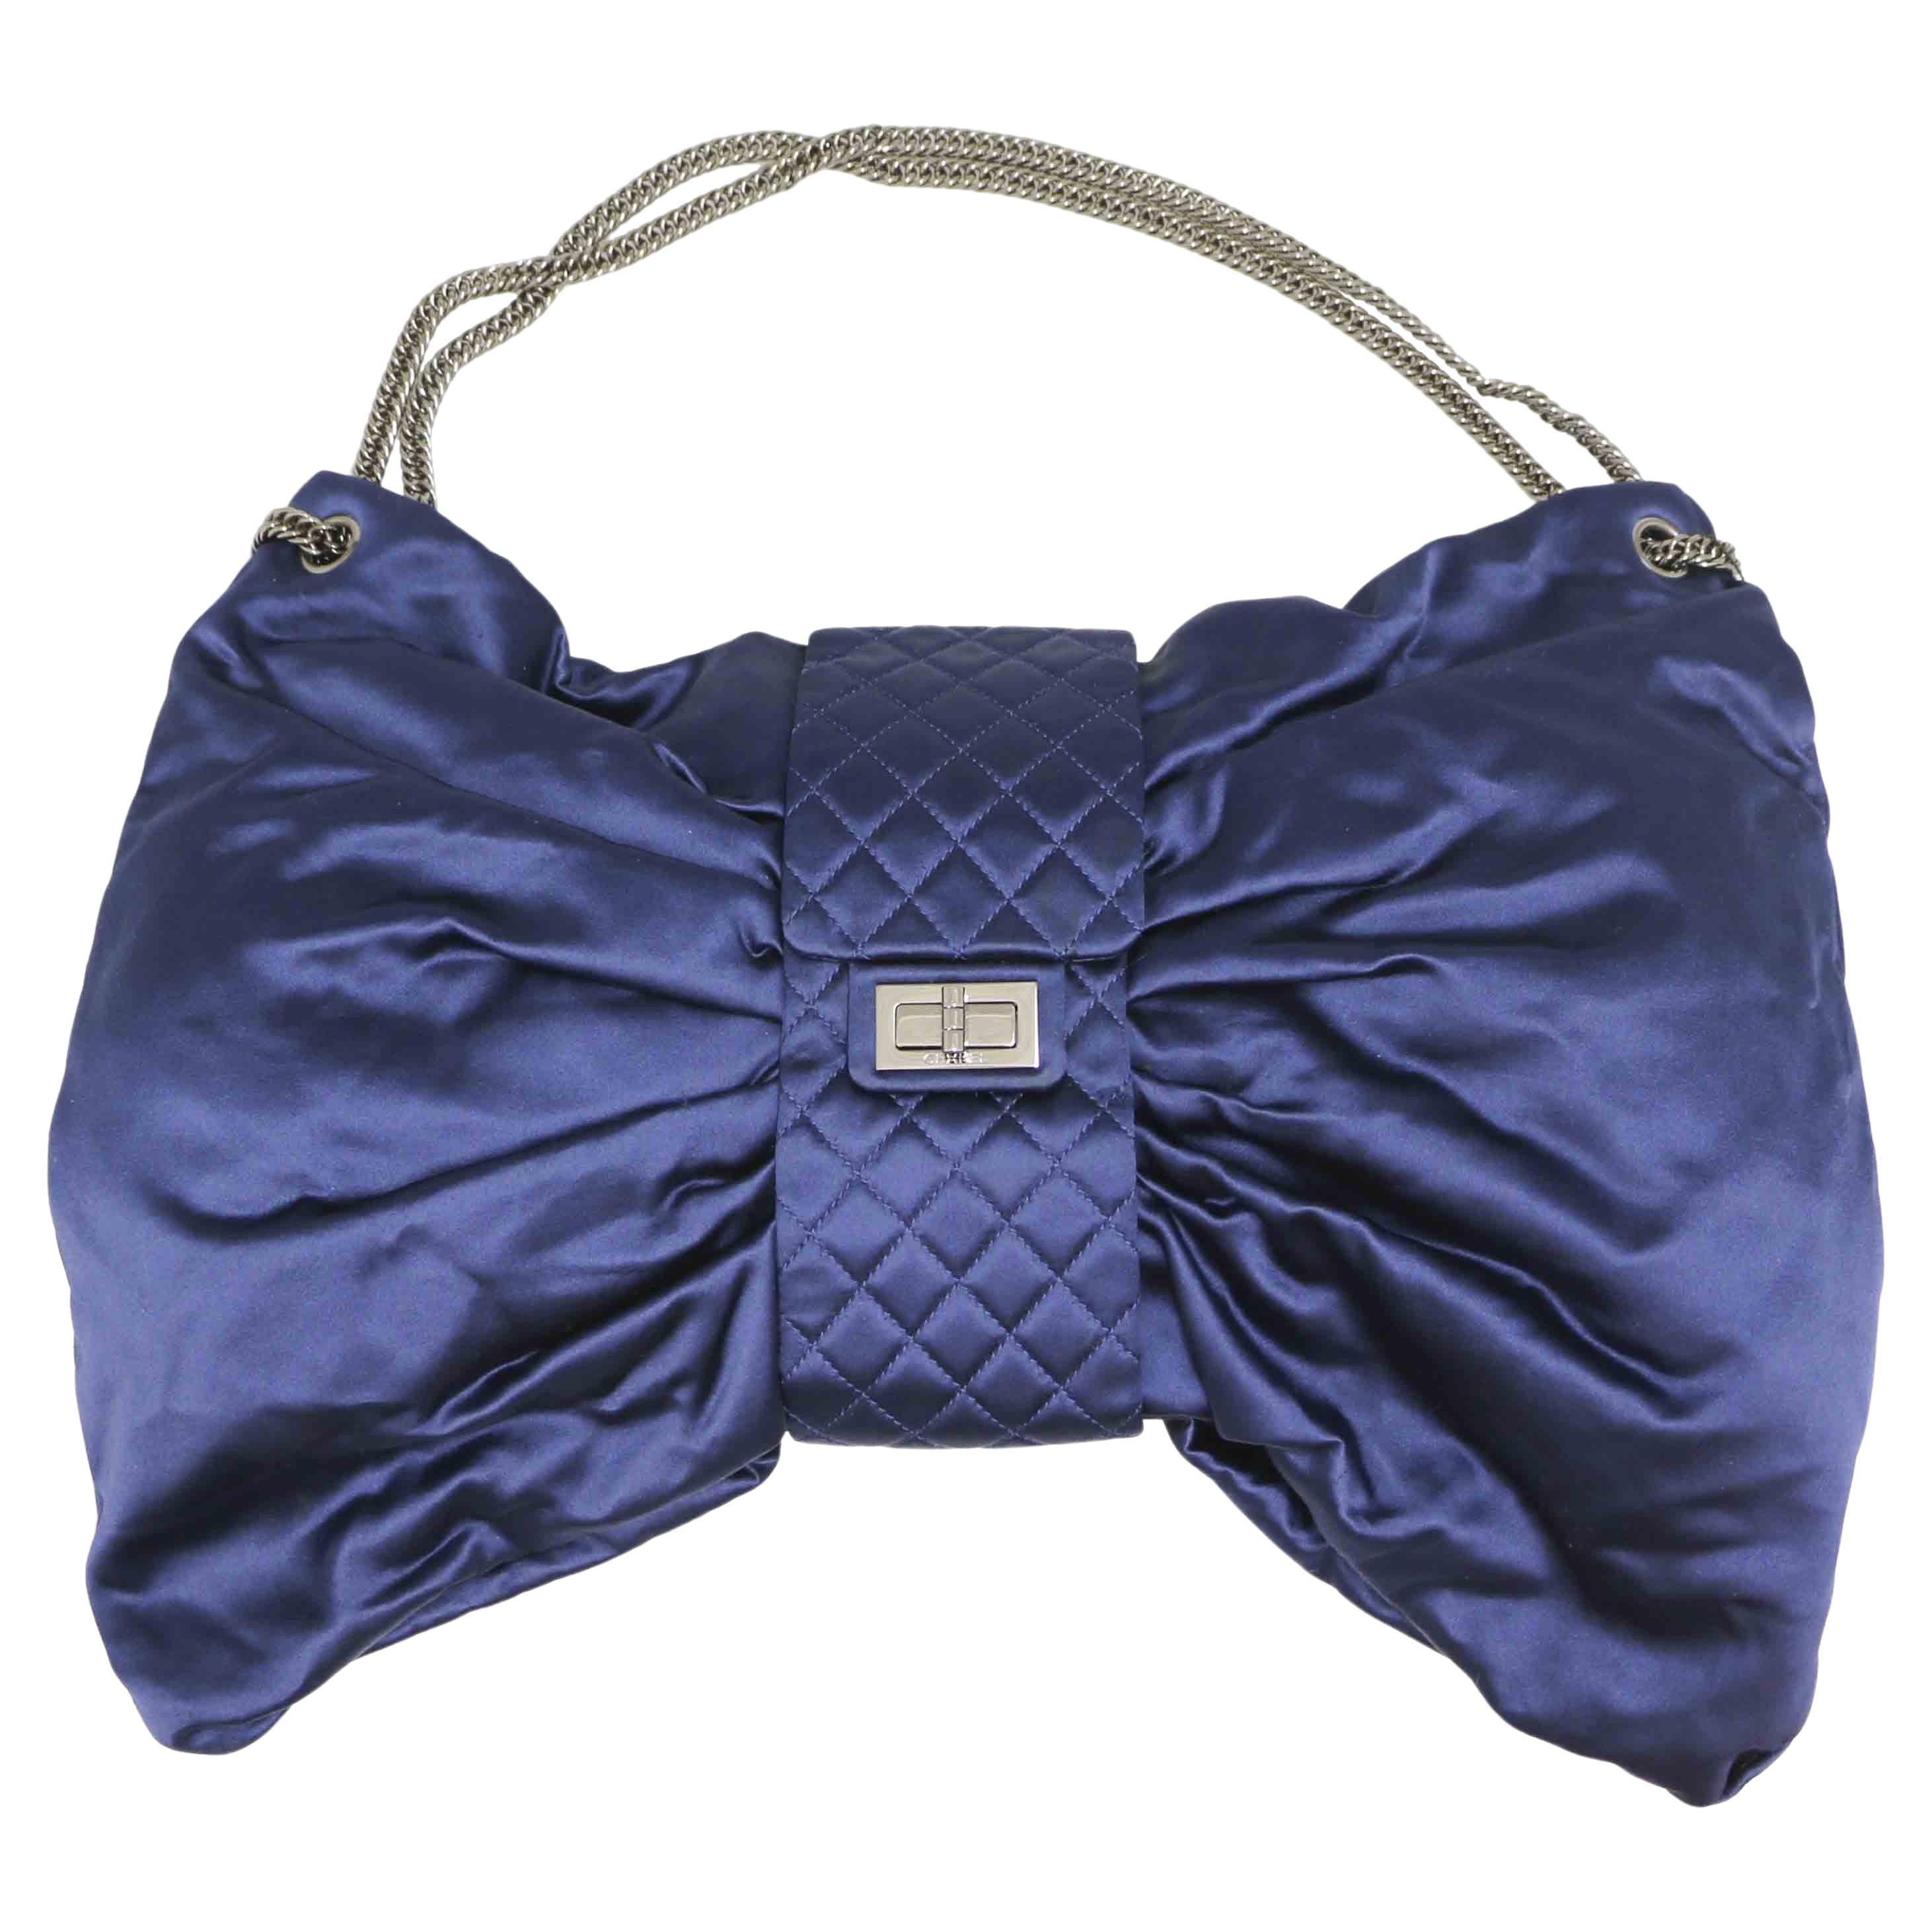 CHANEL Butterfly Bag in Blue Satin Duchess For Sale